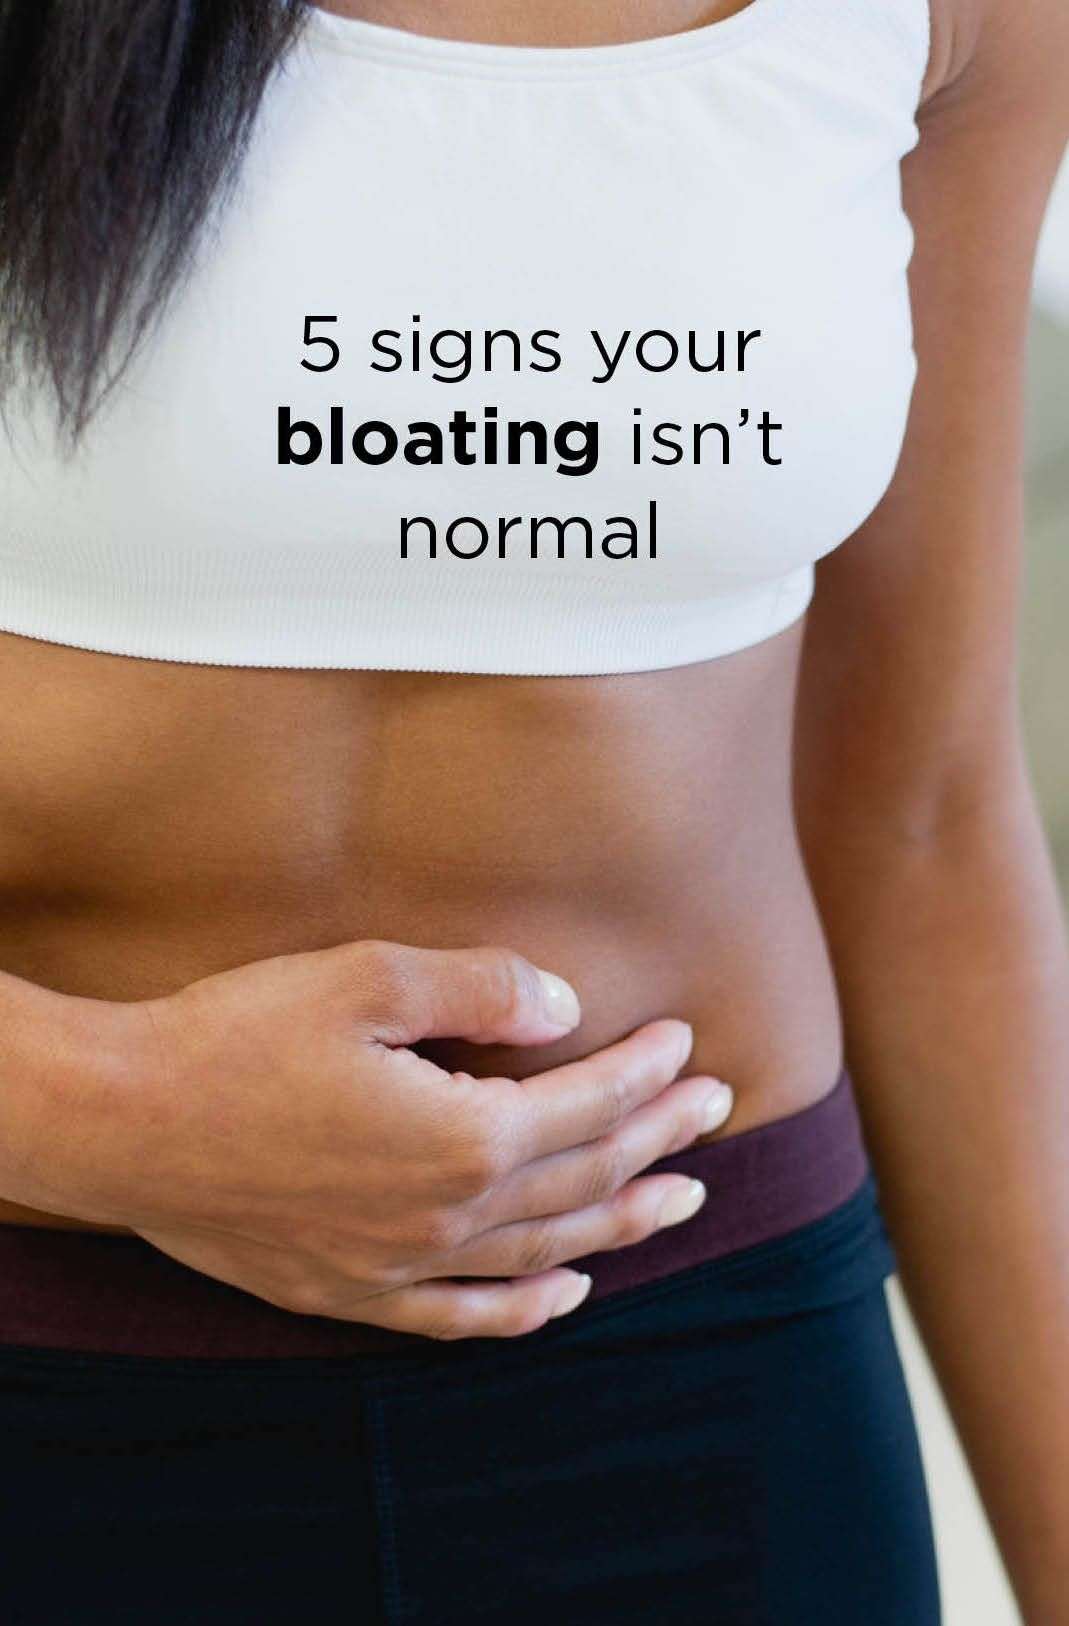 5 Signs Your Bloating Isn